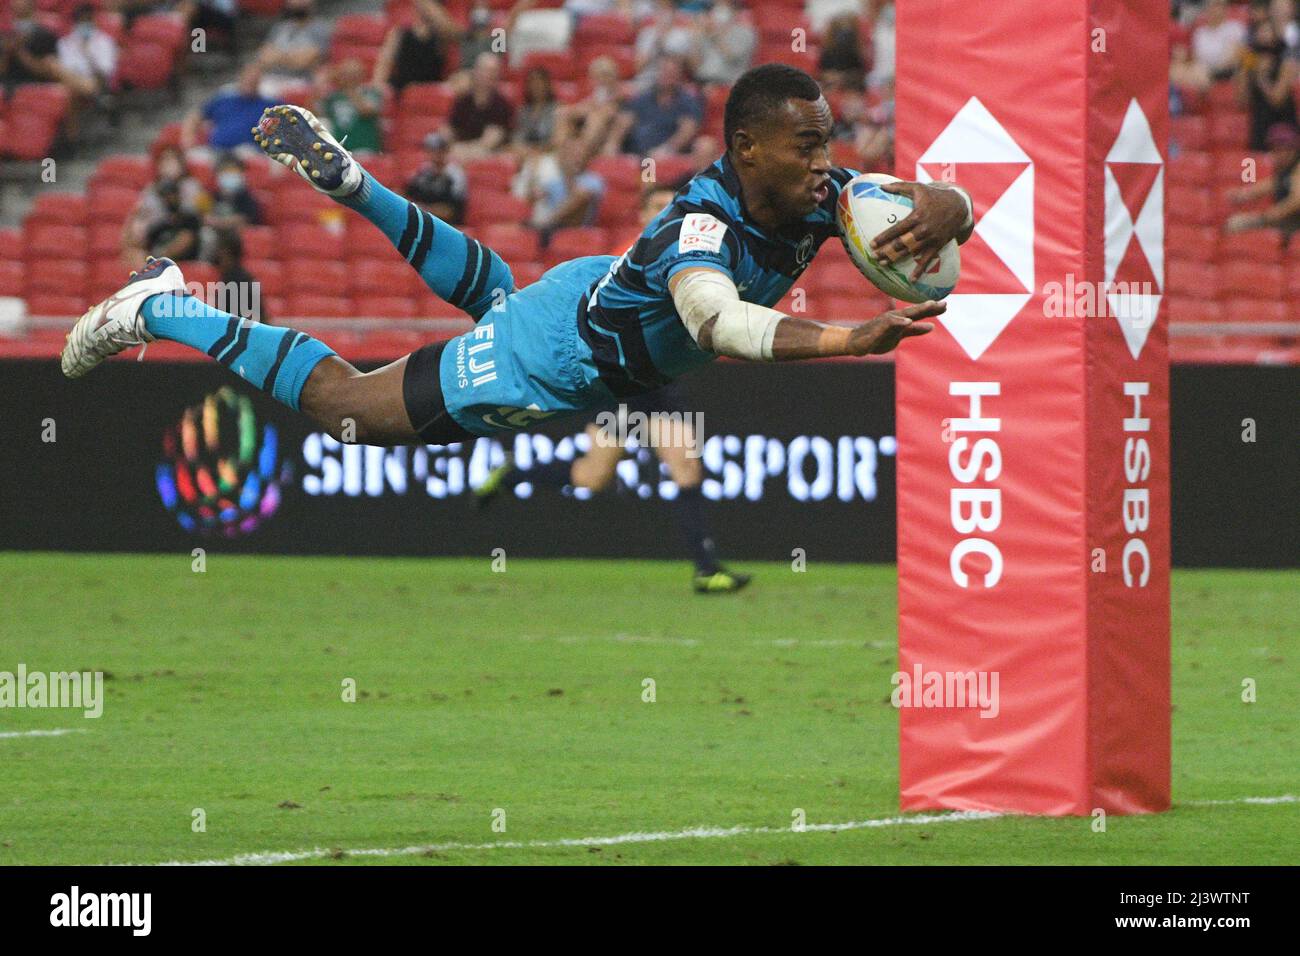 Singapore. 10th Apr, 2022. Vuivawa Naduvalo of Fiji scores a try during the final between New Zealand and Fiji at the HSBC World Rugby Sevens Singapore stop, held in the National Stadium on April 10, 2022. Credit: Then Chih Wey/Xinhua/Alamy Live News Stock Photo